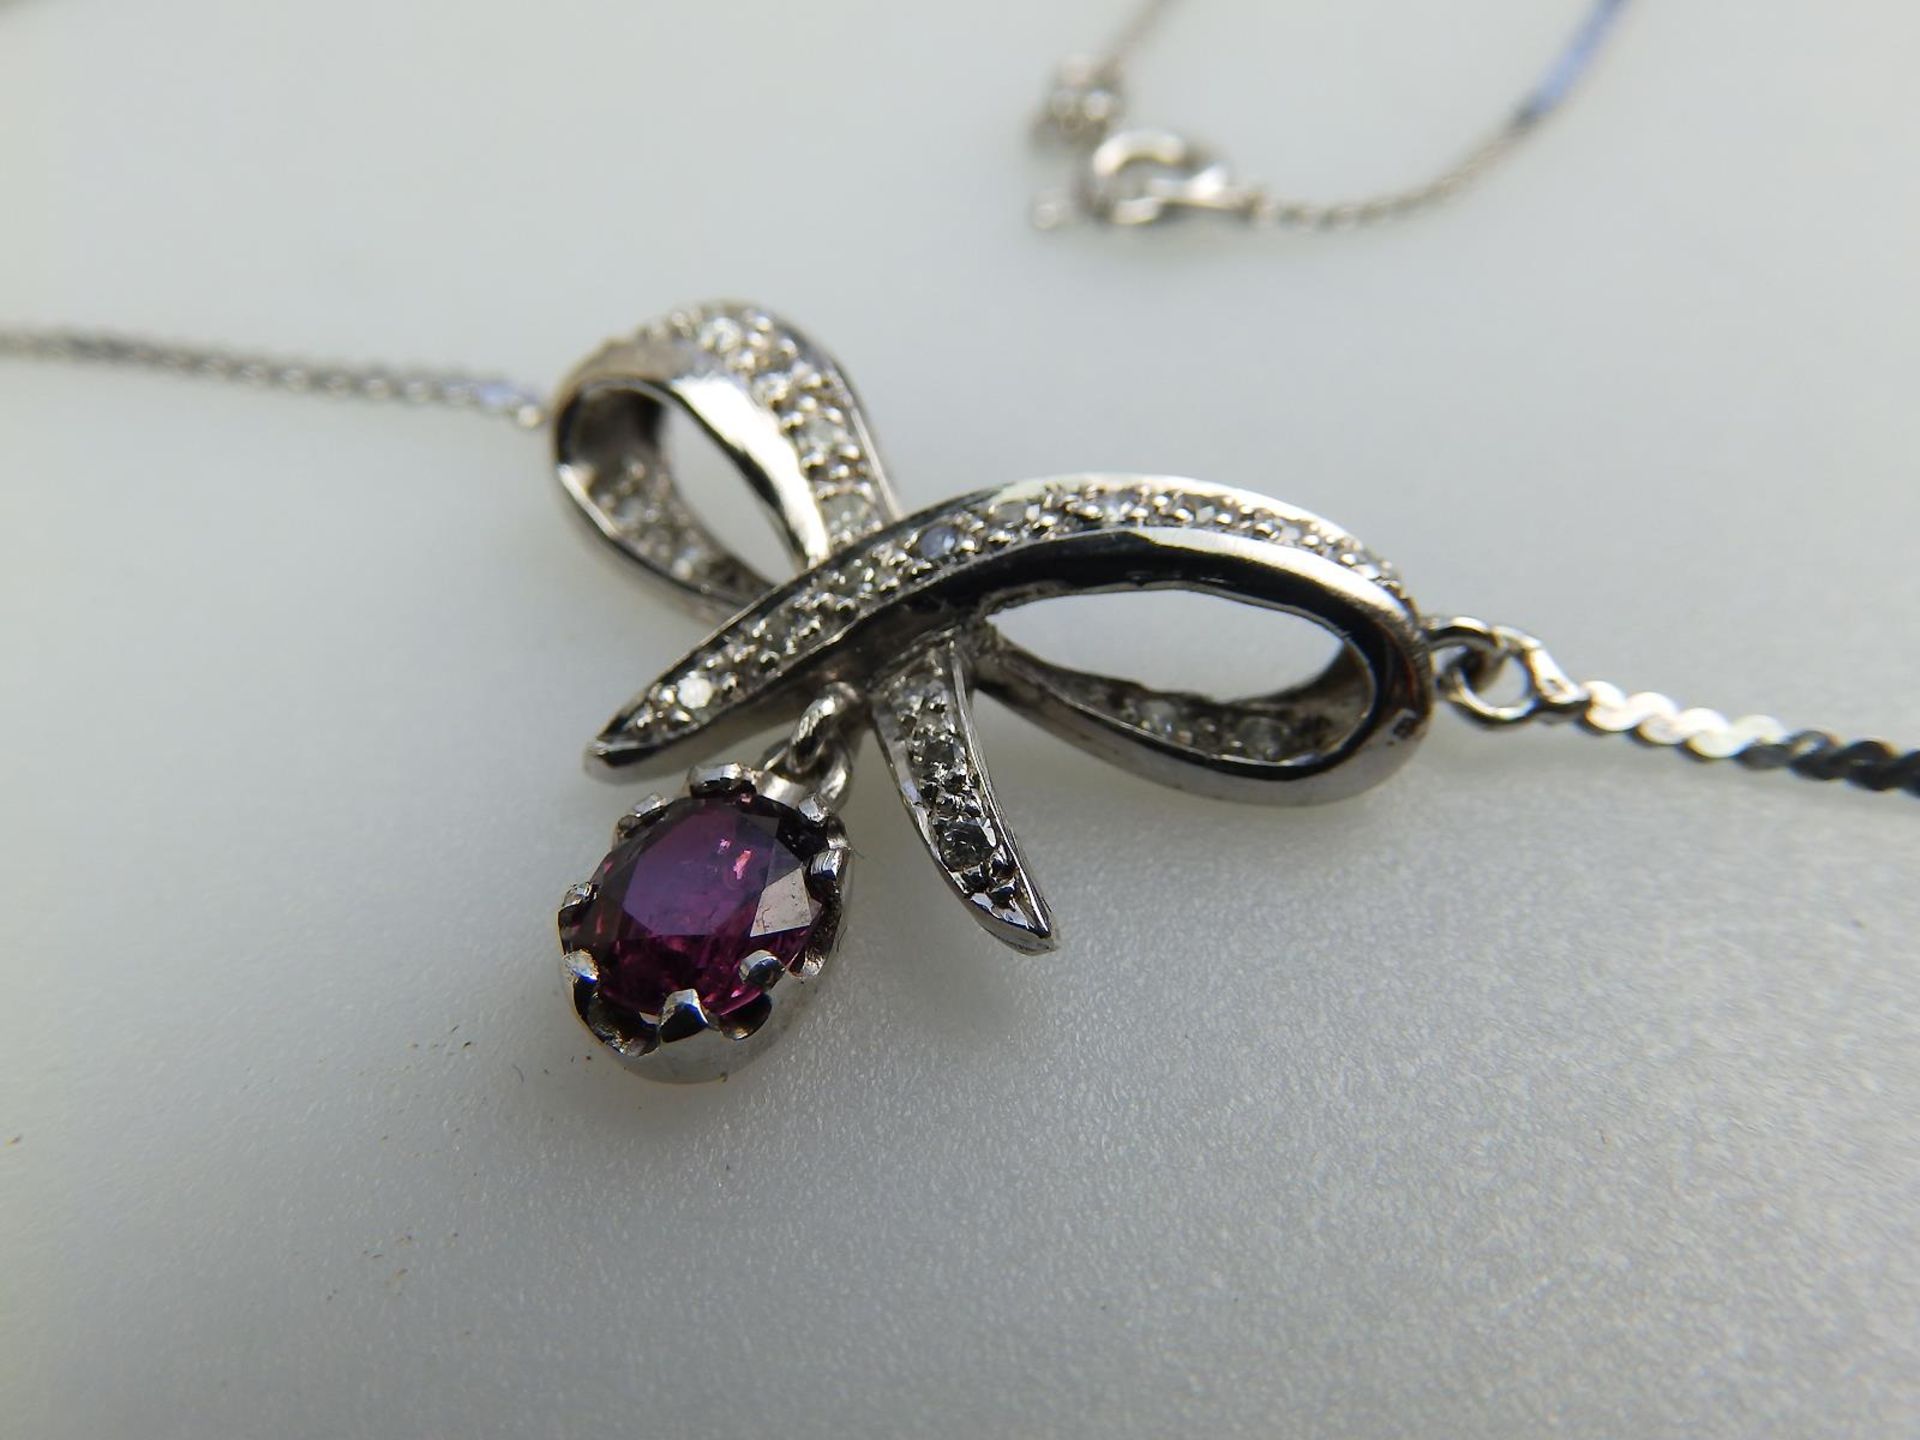 A 9 ct white gold and diamond & garnet pendant and chain, boxed - Image 2 of 4